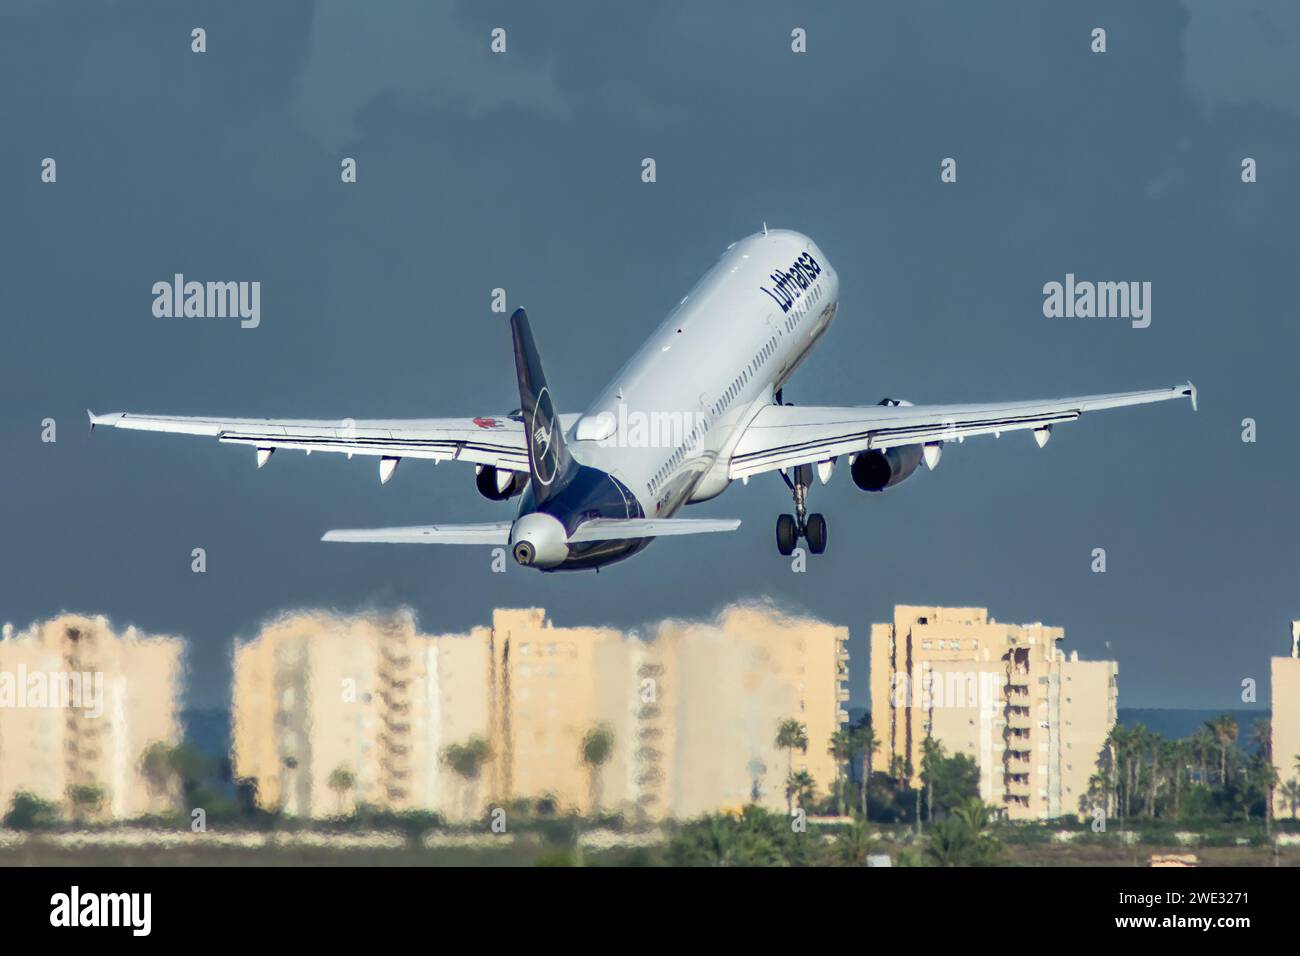 Airbus A321 airliner of the German airline Lufthansa taking off from Alicante airport Stock Photo